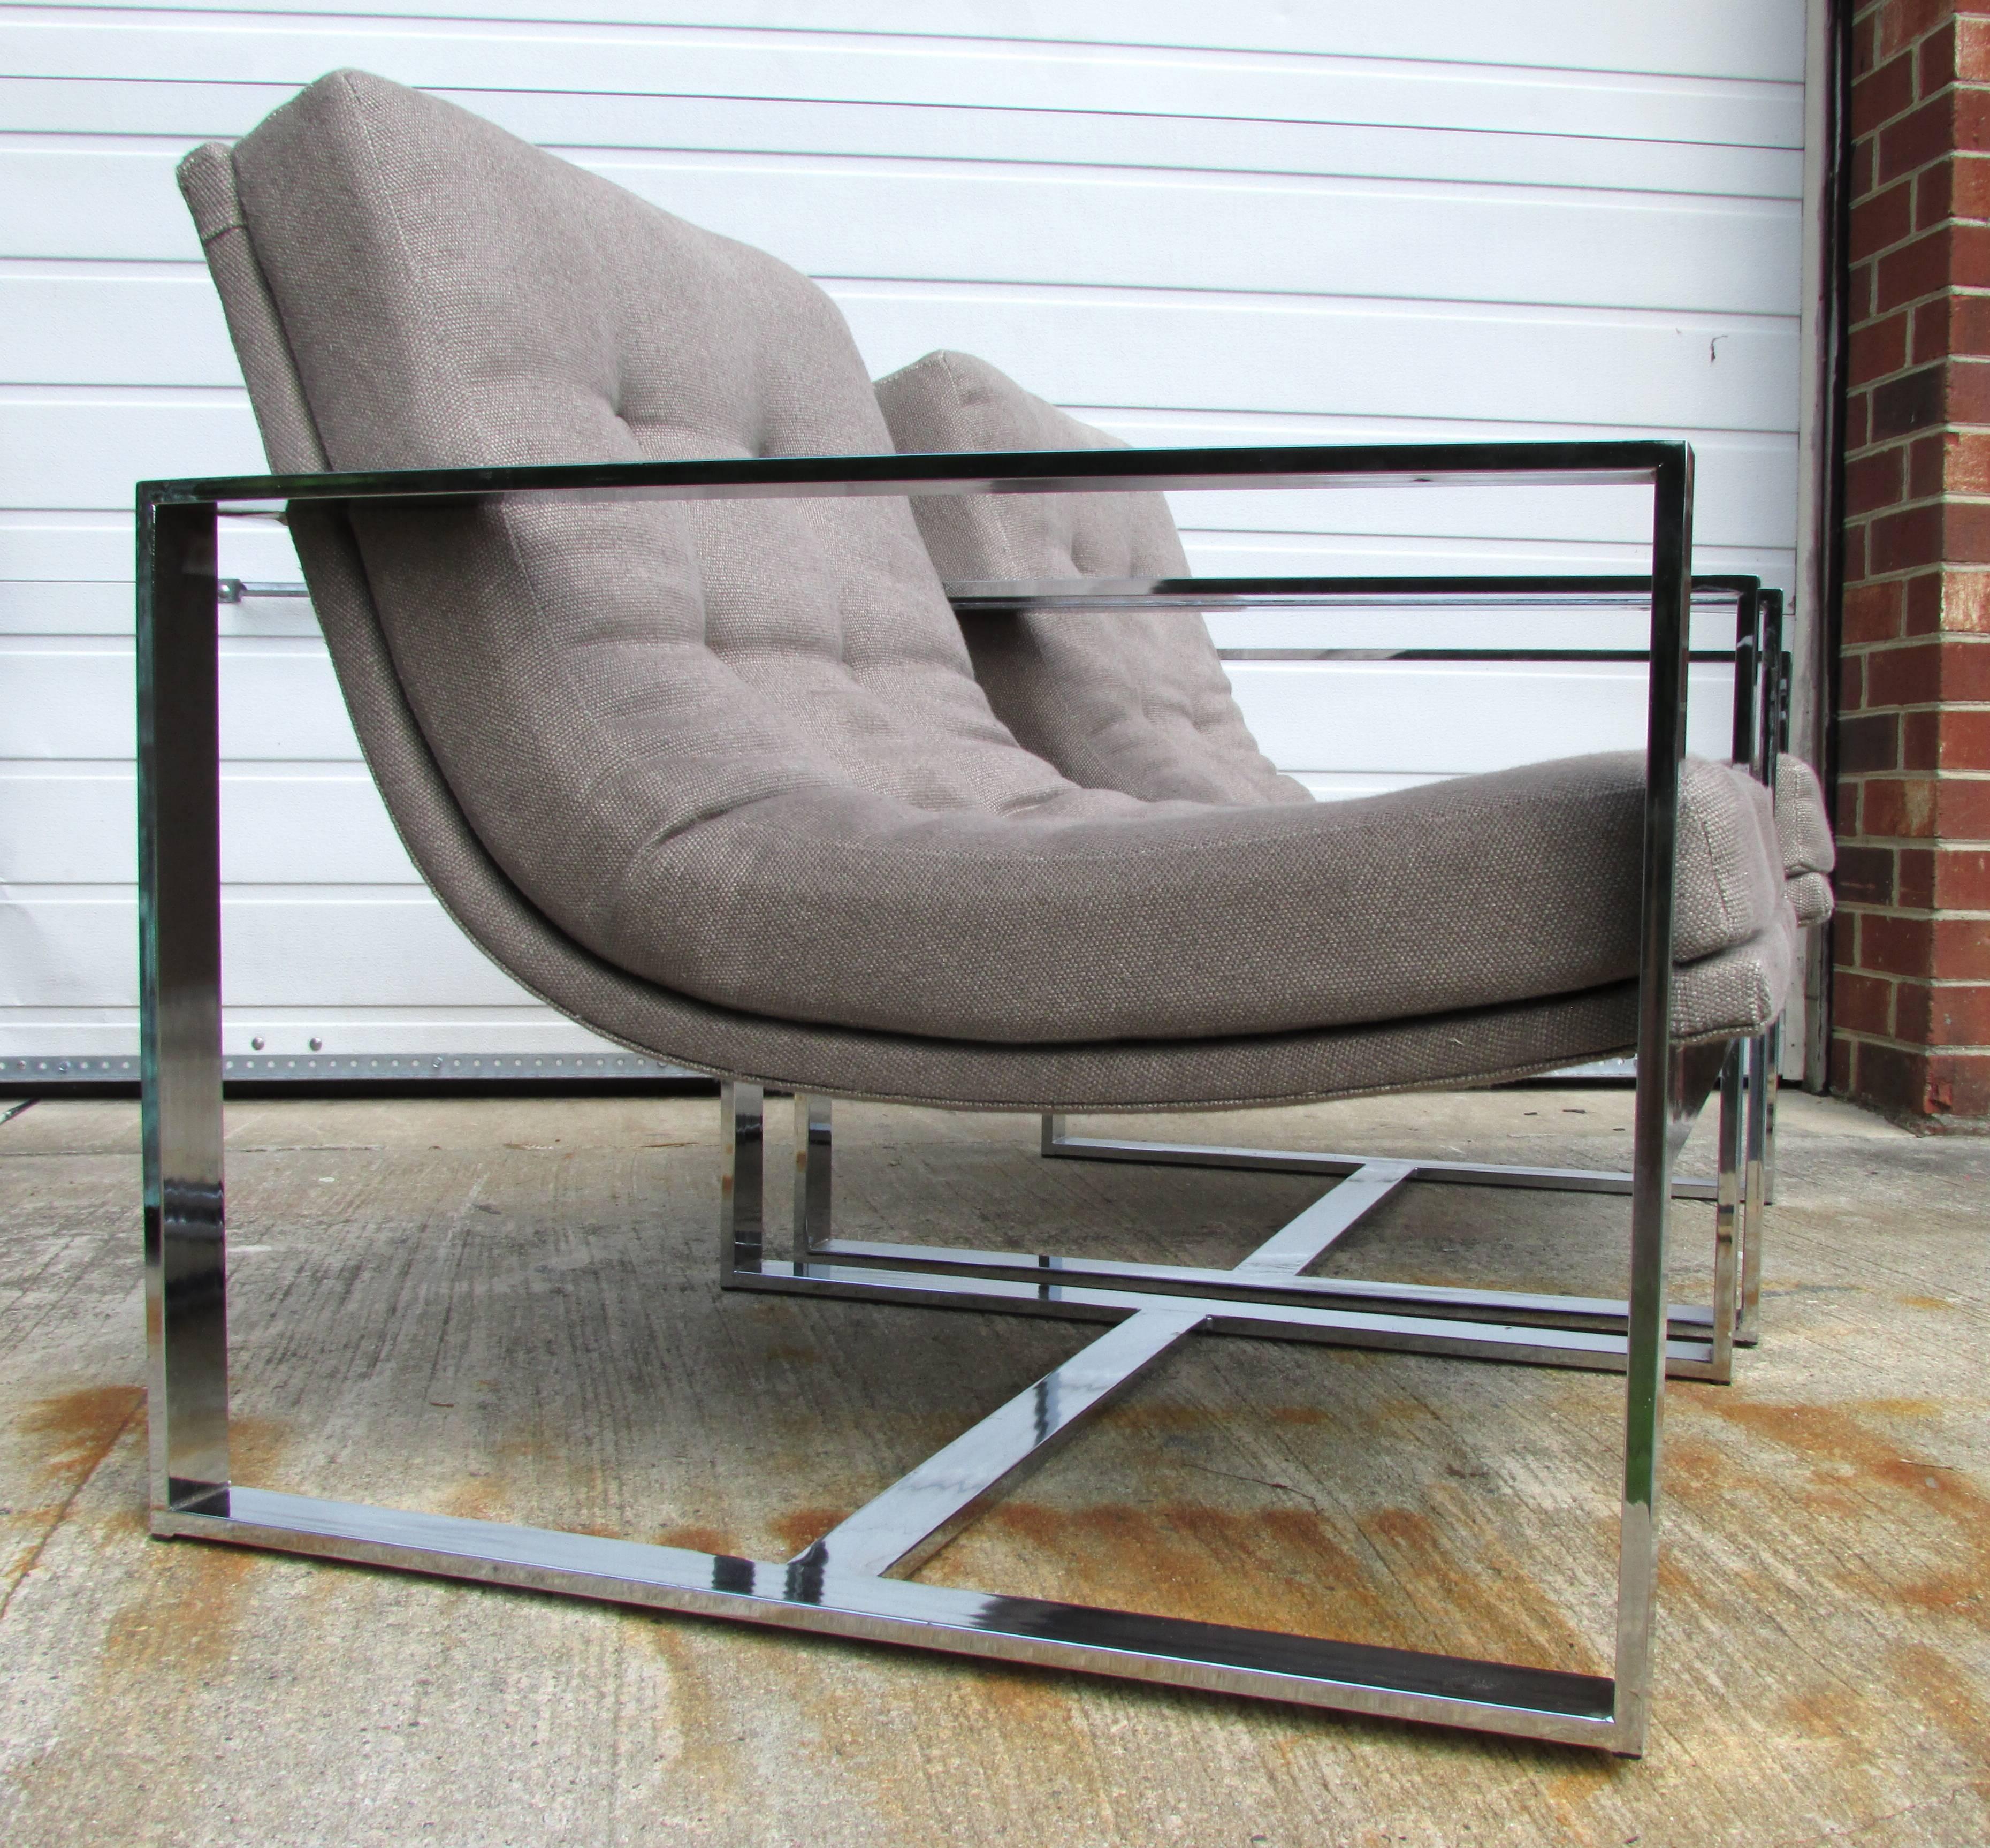 American Pair of Milo Baughman Cube Chairs For Sale